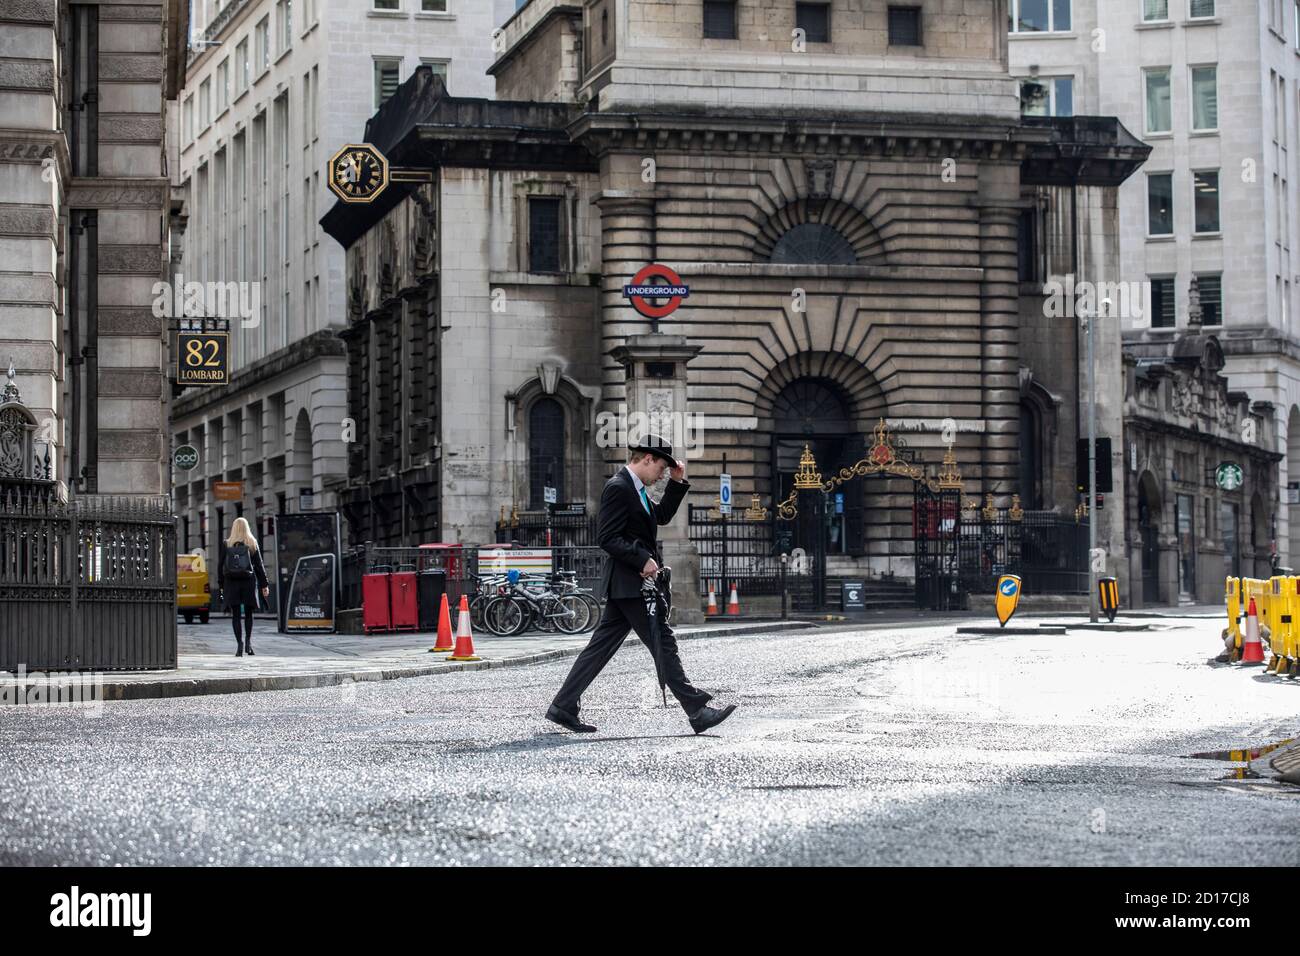 Worker wearing bowler hat carrying an umbrella makes his way across Lombard Street in the financial district of City of London, England, UK Stock Photo